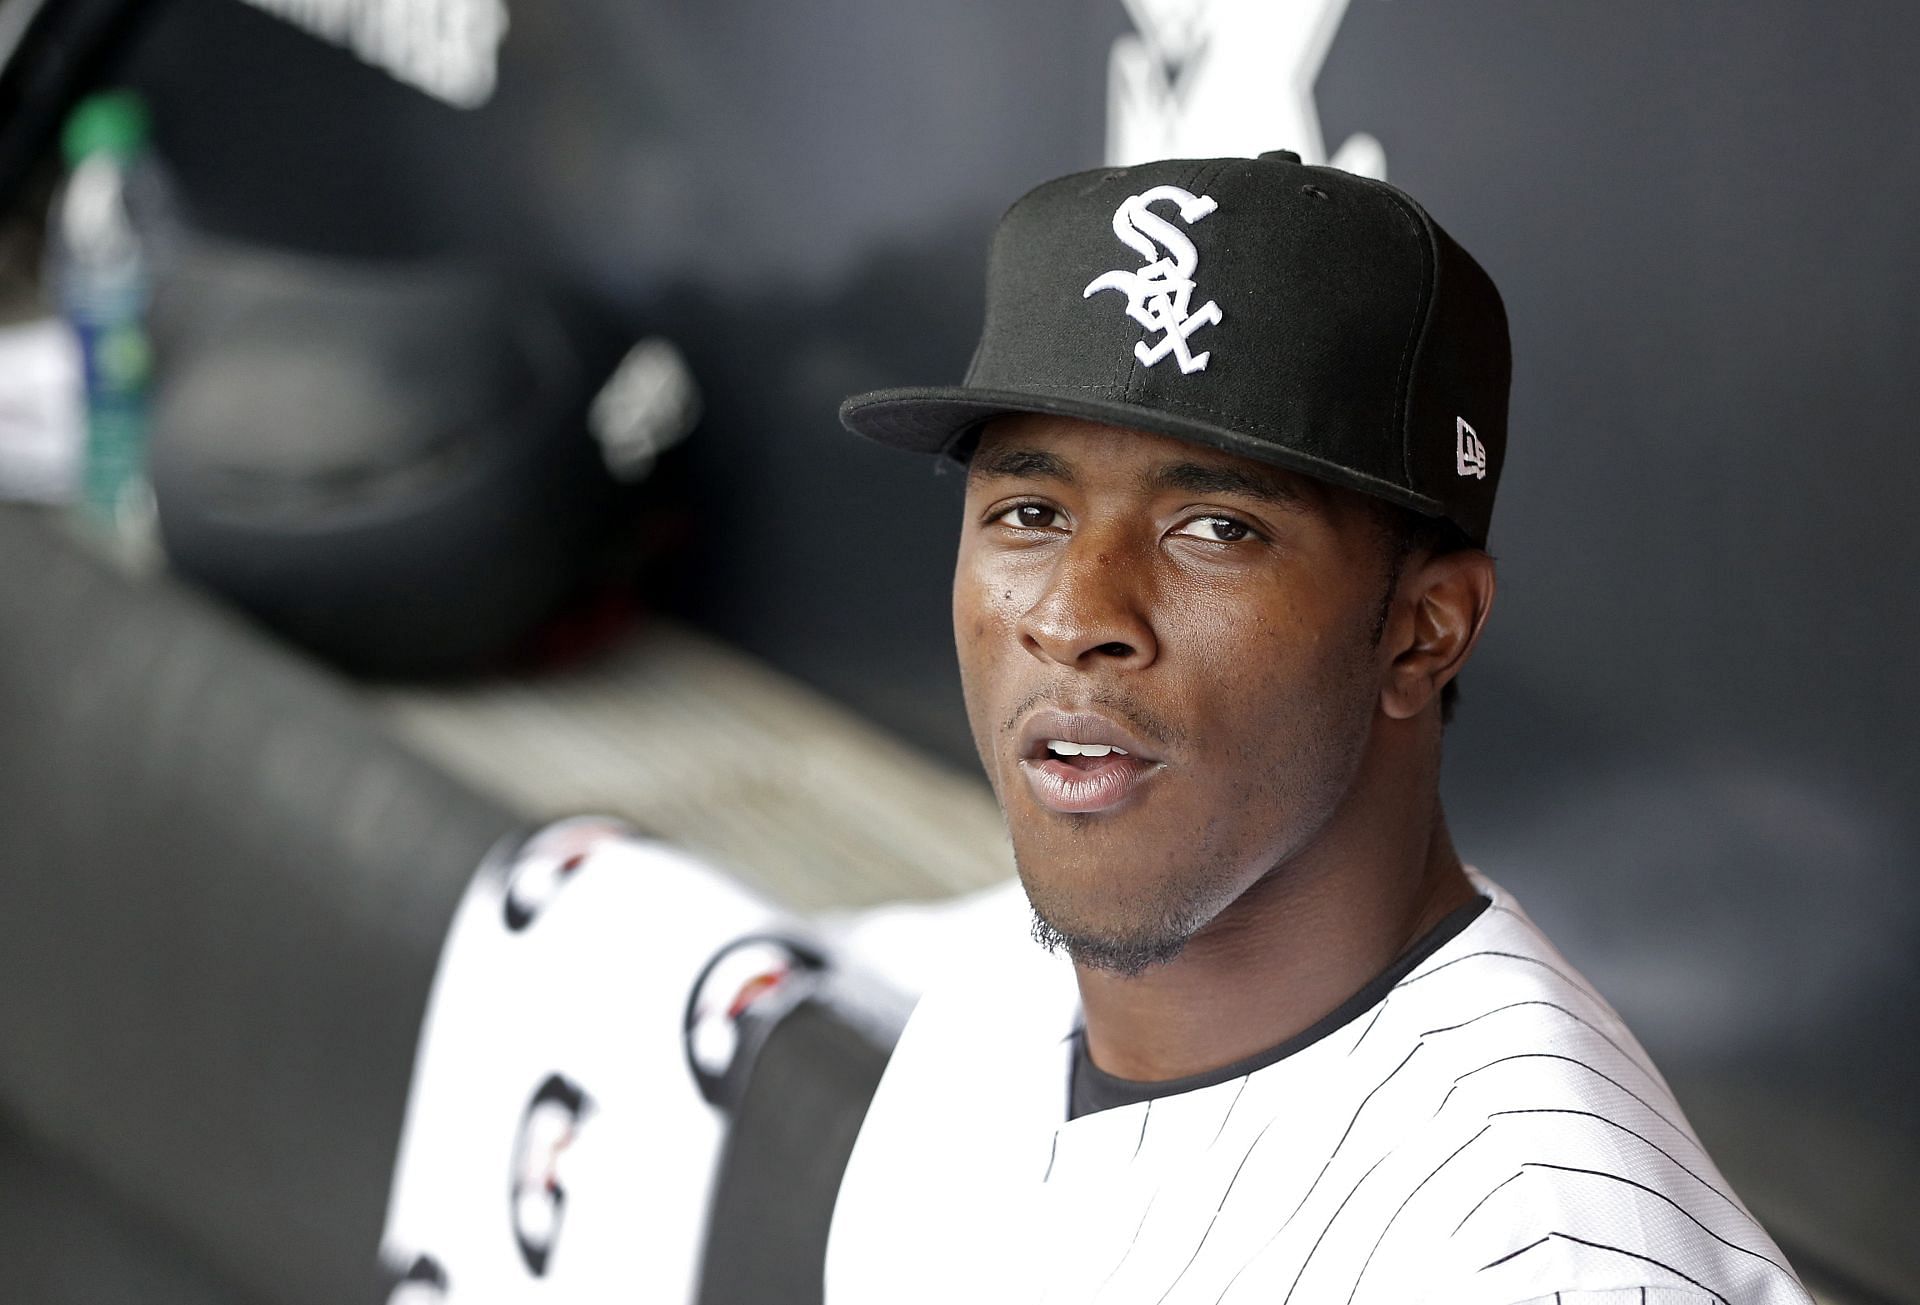 Chicago White Sox second baseman Tim Anderson wanted nothing to do with New York Yankees 3B Josh Donaldson 3 years ago